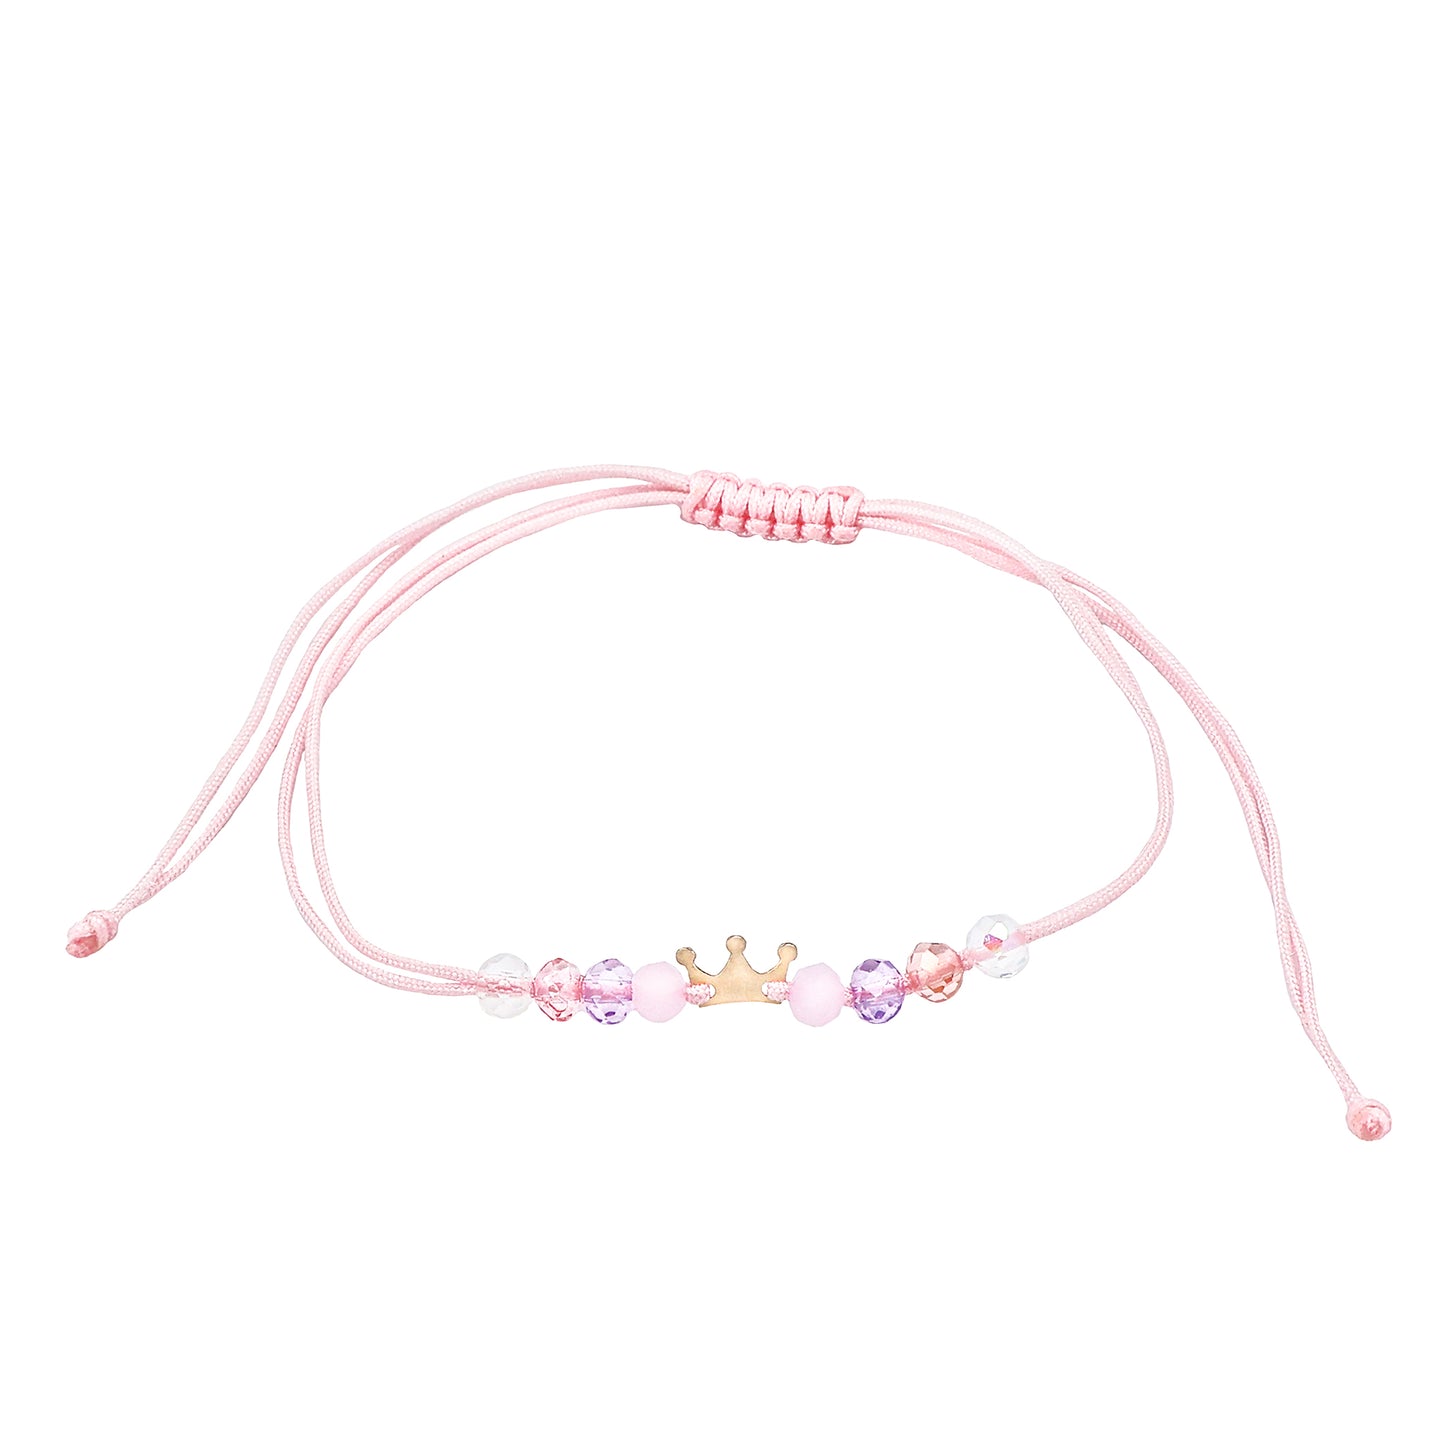 Bracelet with a 14K solid gold crown pendant and multicolored pink crystals Vega Lopez